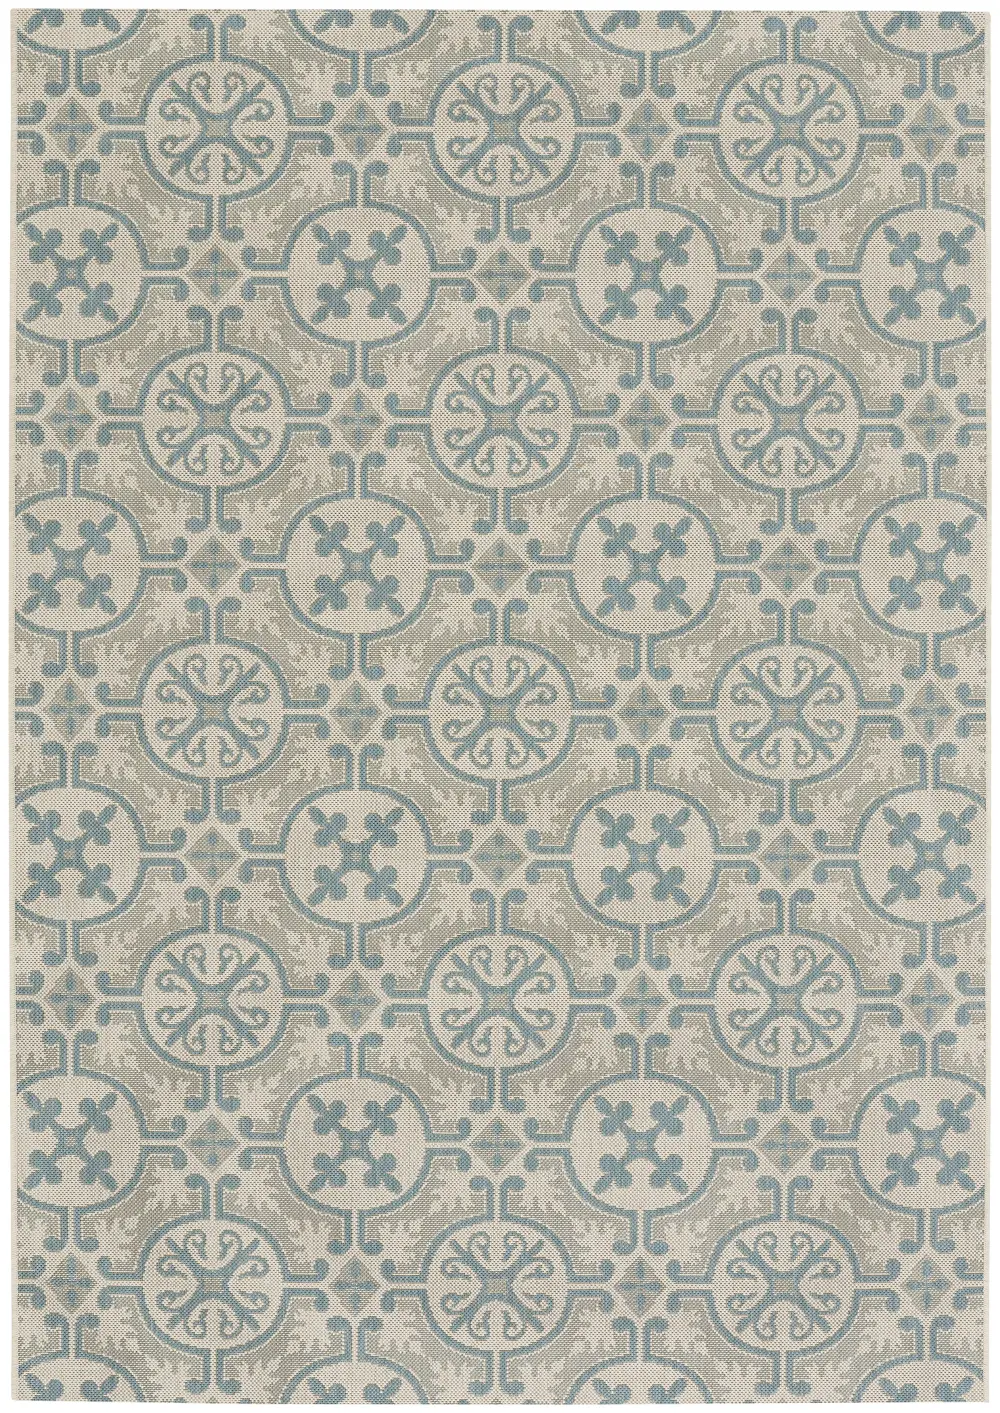 473735420 4 x 6 Small Spa Blue Indoor-Outdoor Rug - Finesse Tile-1